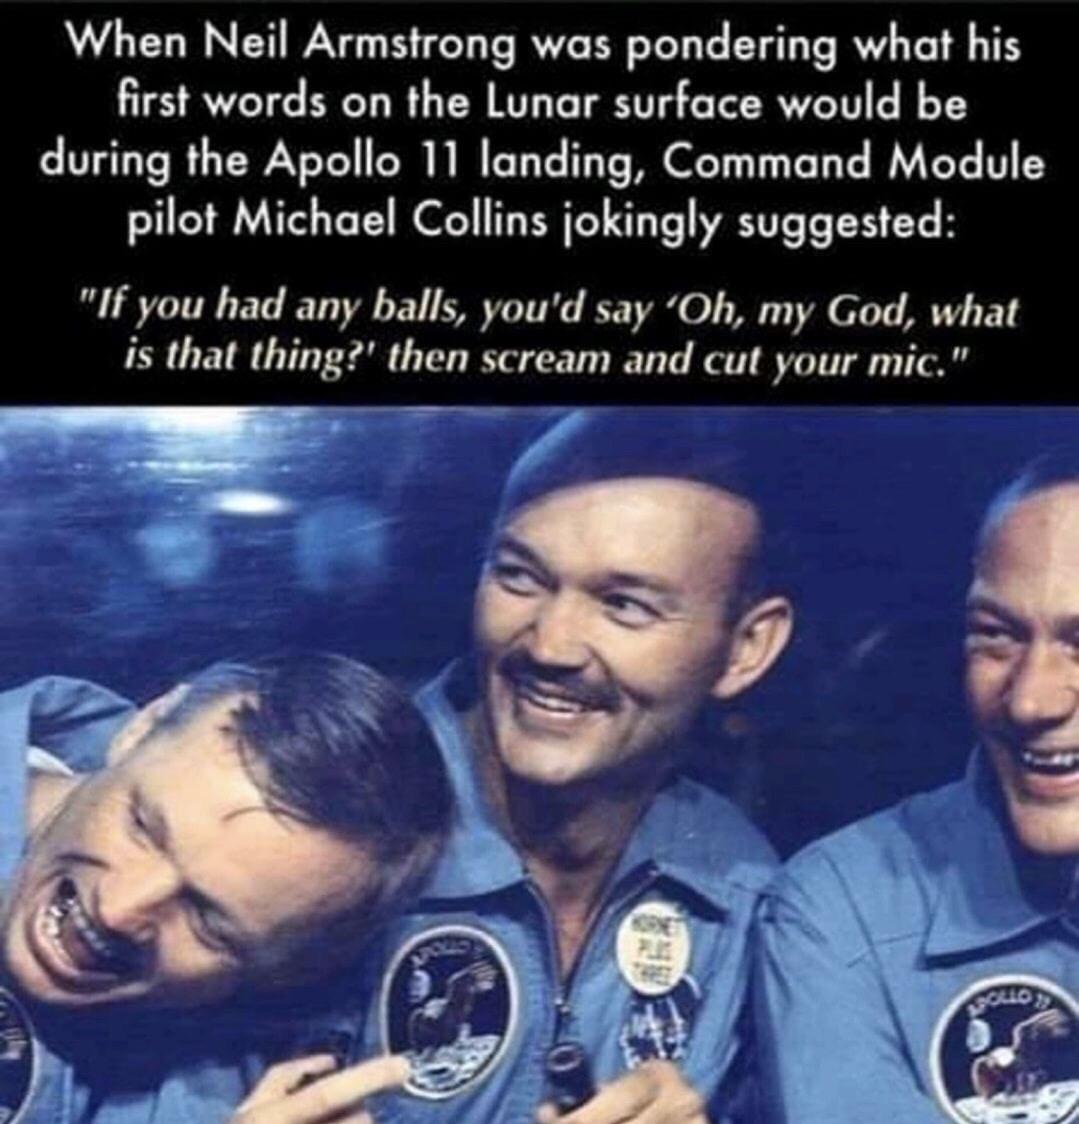 apollo 11 astronauts - When Neil Armstrong was pondering what his first words on the Lunar surface would be during the Apollo 11 landing, Command Module pilot Michael Collins jokingly suggested "If you had any balls, you'd say 'Oh, my God, what is that th